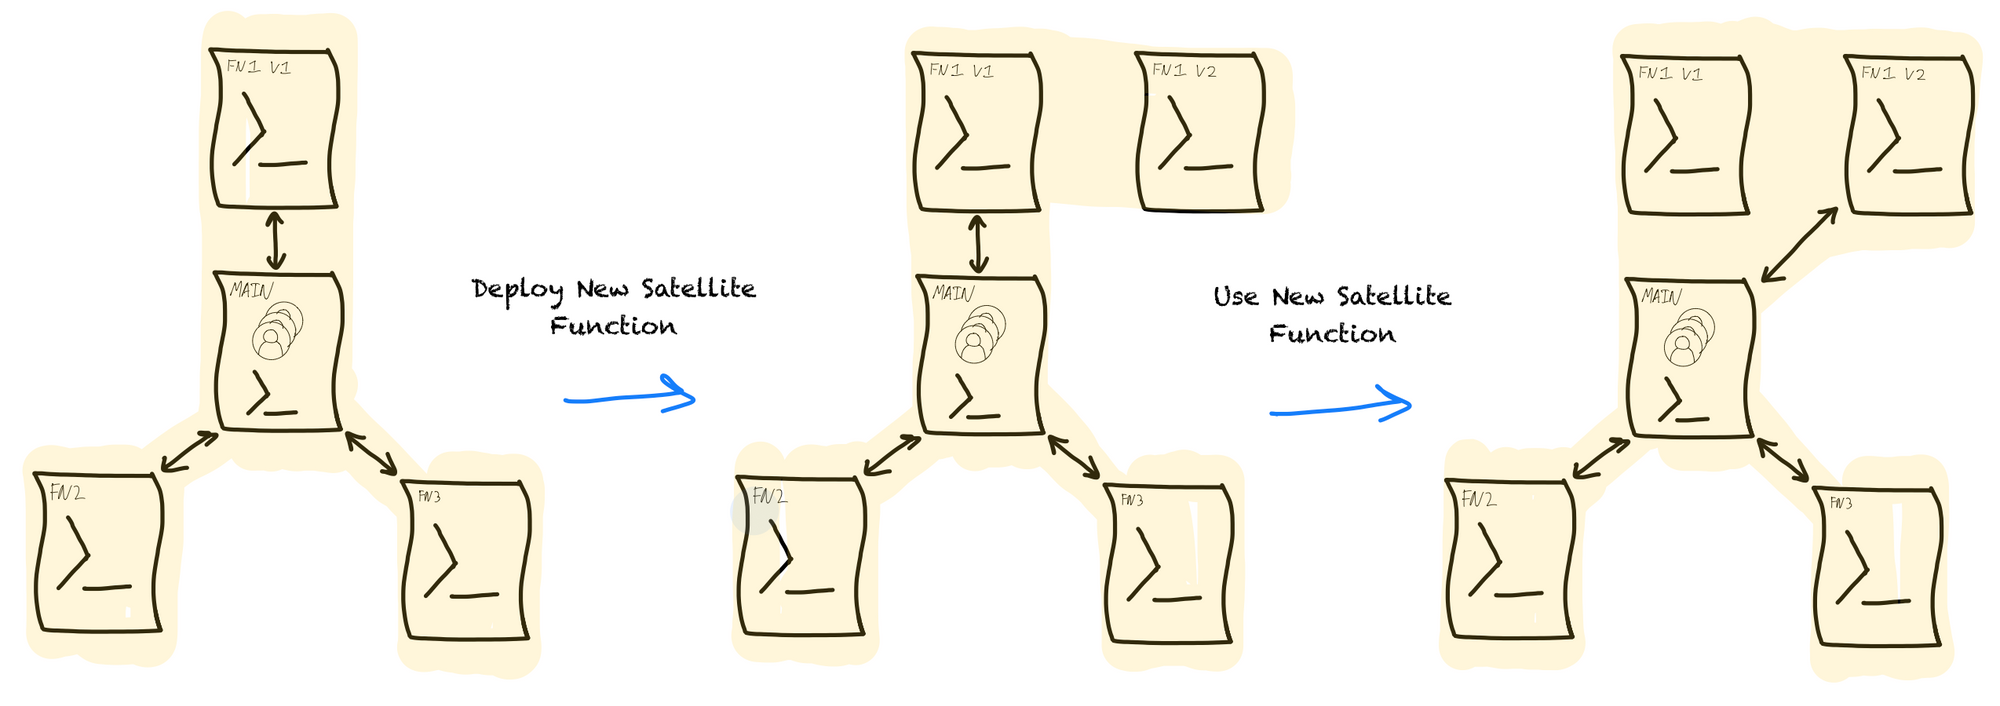 With the strategy pattern, you can deploy a new version of a function and then tell the main contract to use it.